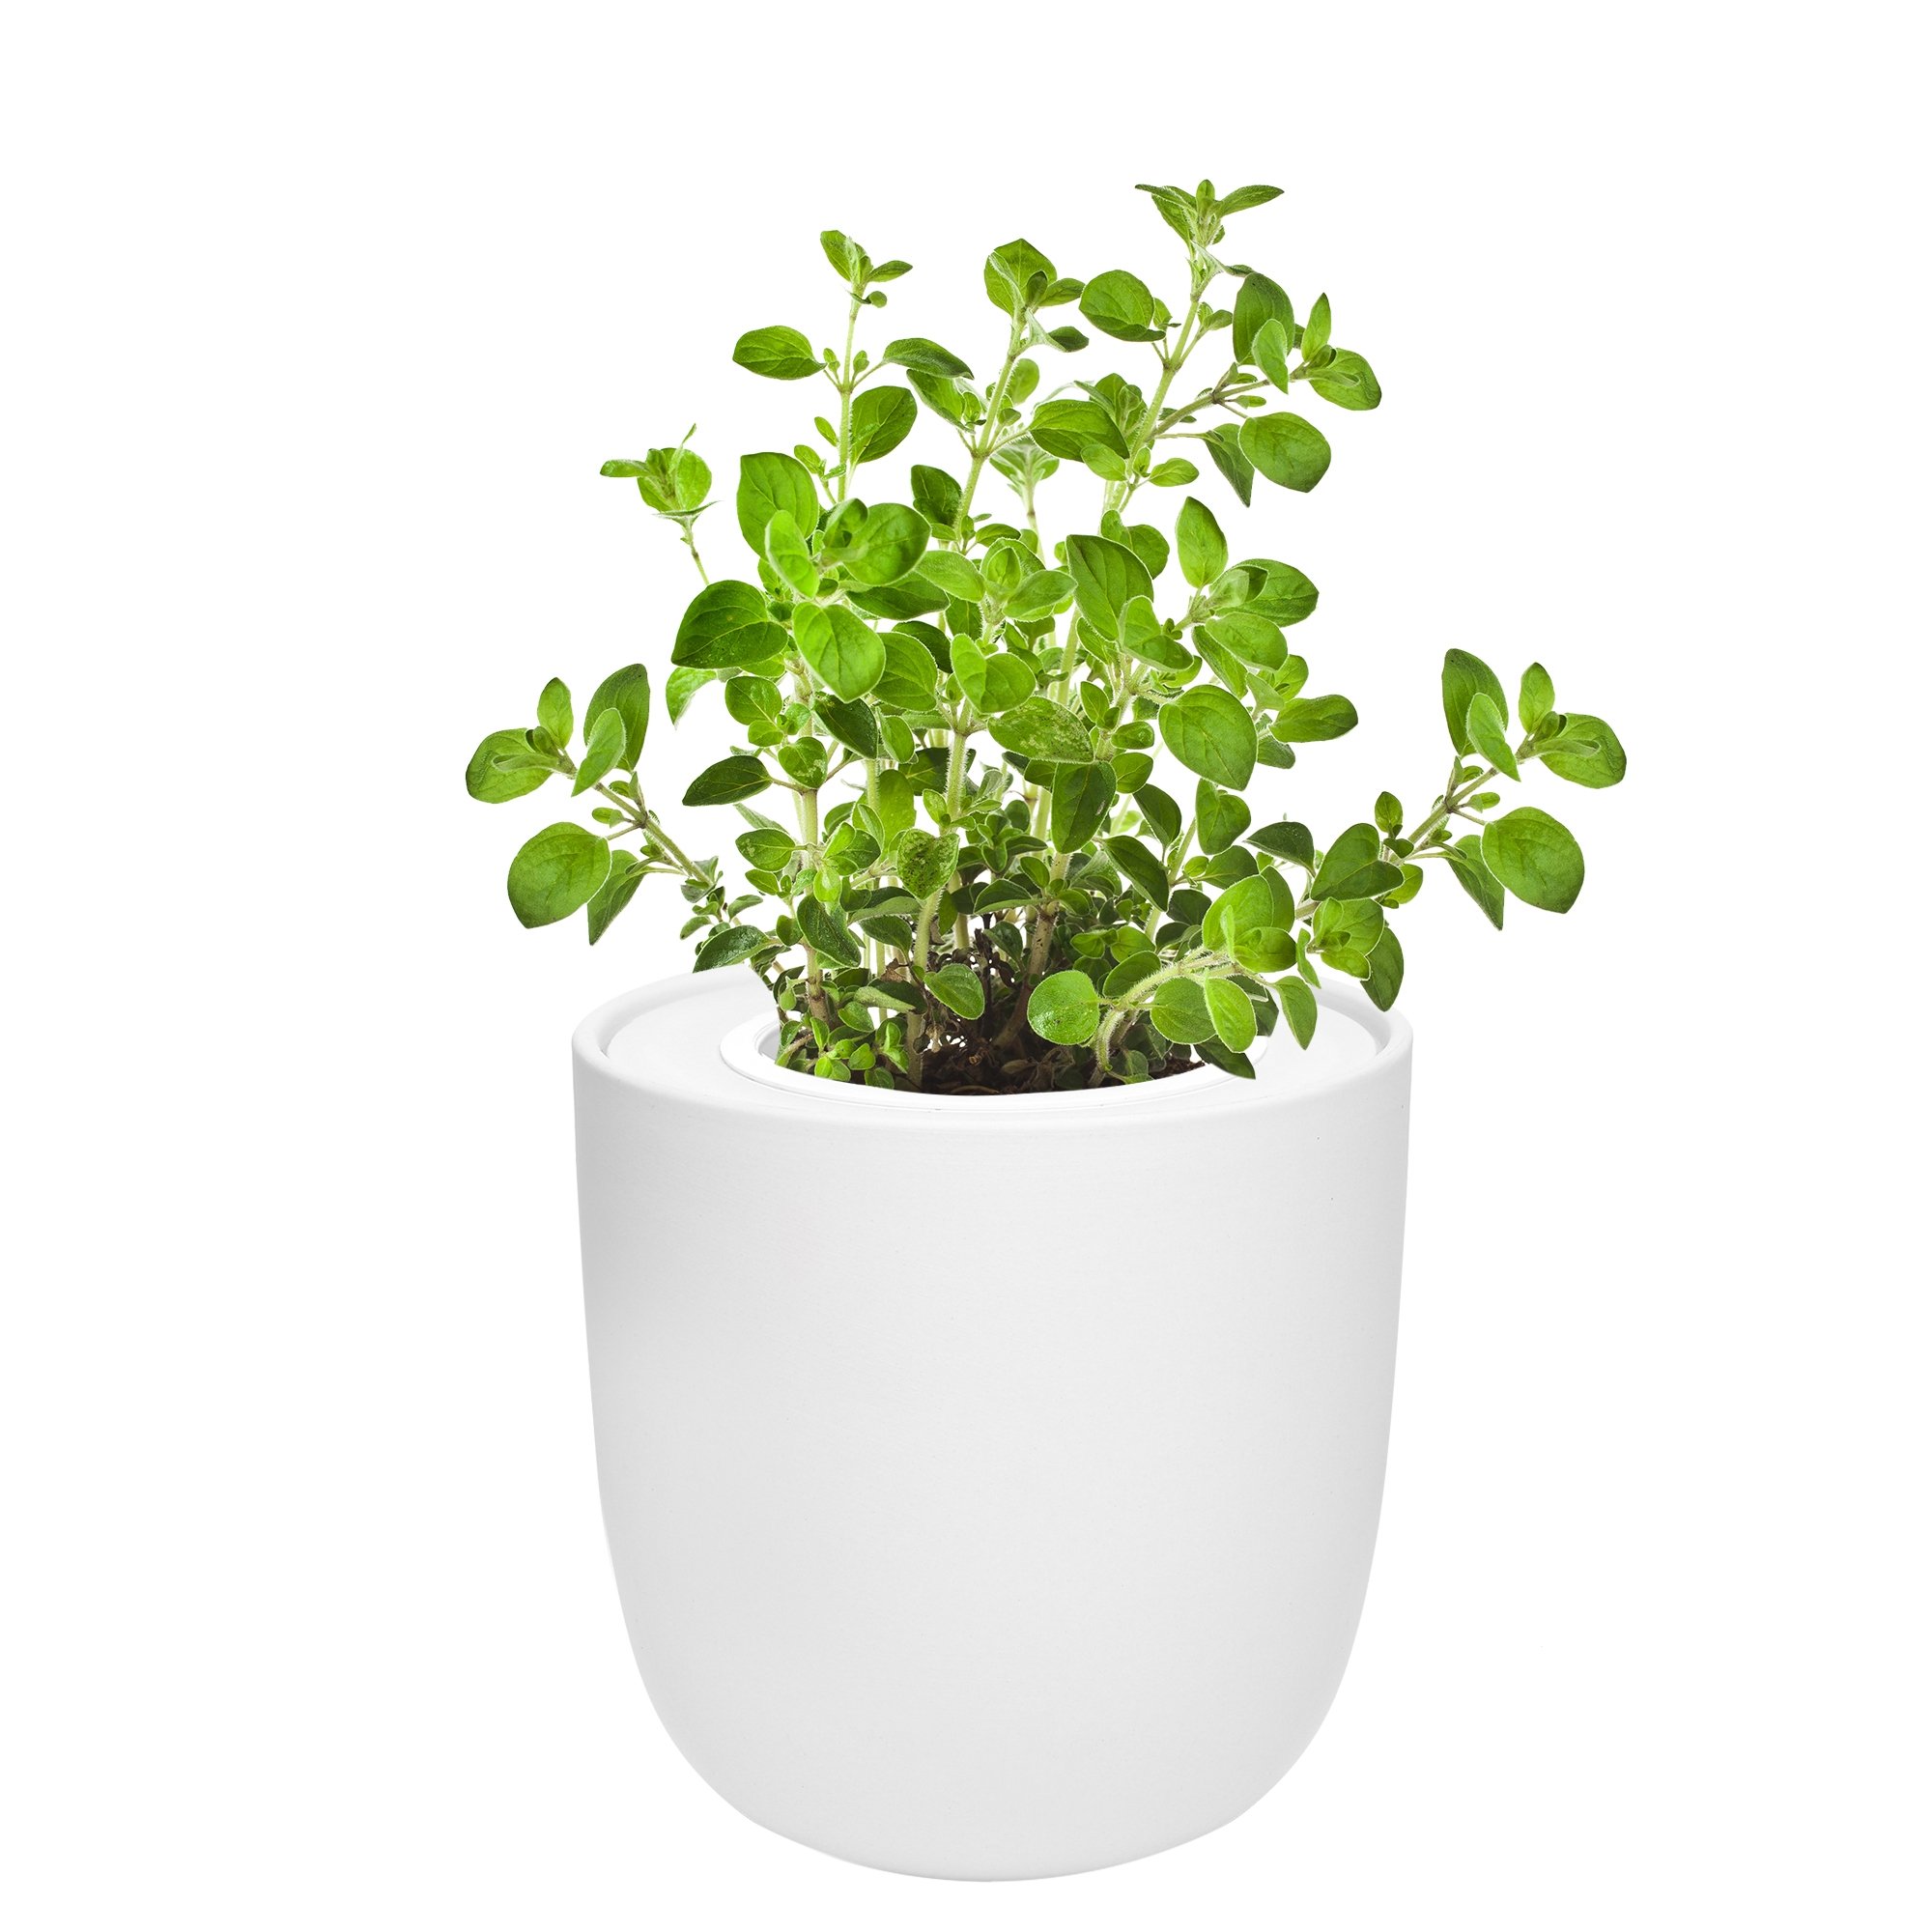 Hydroponic Herb Growing Kit with White Ceramic Pot and Seeds (Oregano)